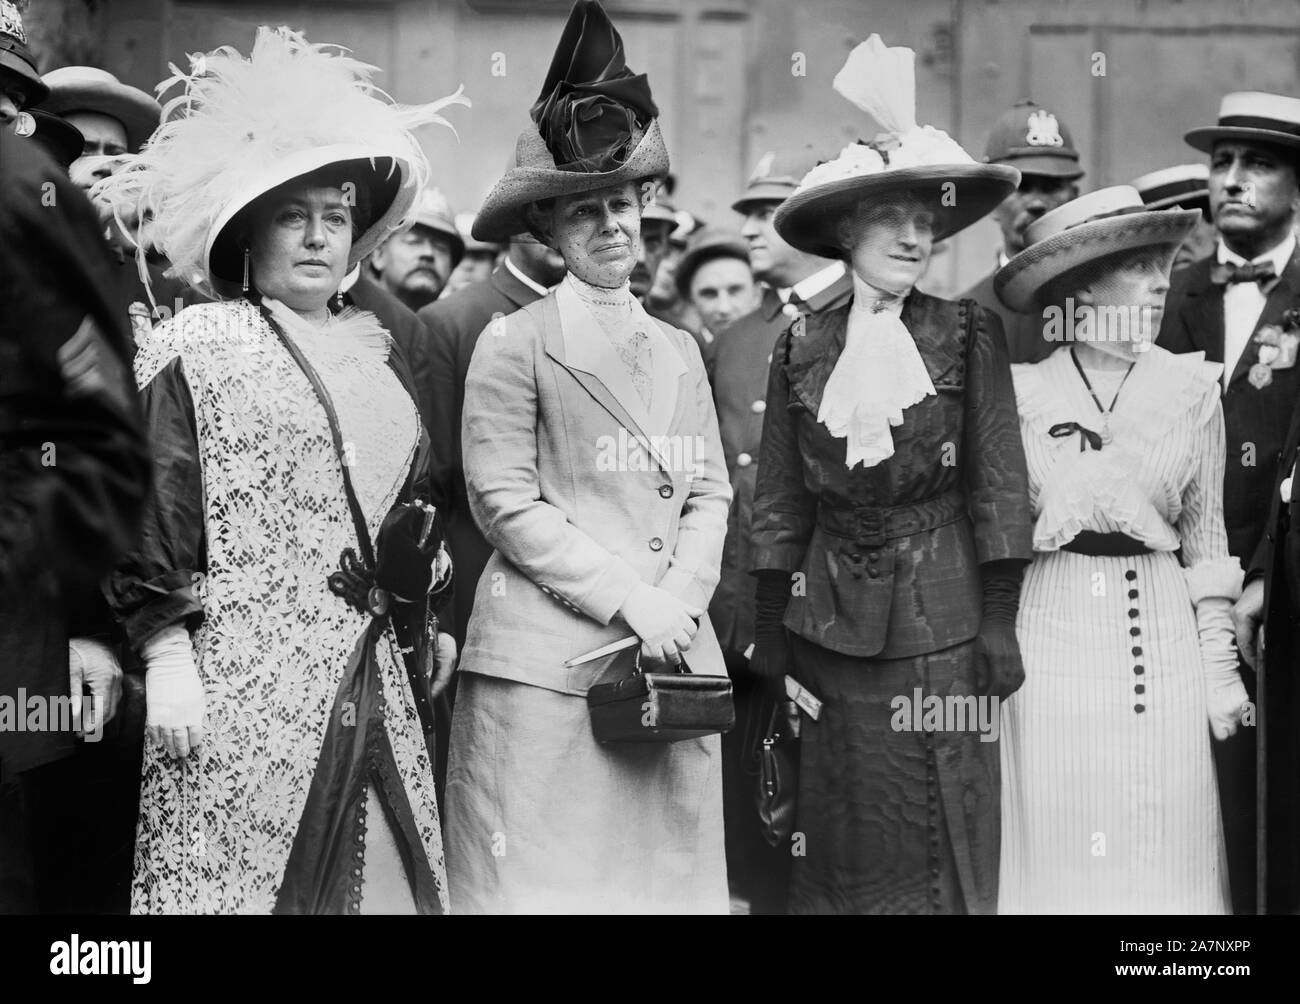 L-R: Harriet T. Mack, wife of Norman E. Mack (1858-1932) National Chairman of the Democratic Party, Helen Herron Taft (1861-1943), wife of President William Howard Taft, Mrs. L.L. Francis, Mildred Aubrey, Democratic National Convention, Fifth Regiment Armory, Baltimore, Maryland, USA, Photograph by Bain News Service, July 1912 Stock Photo